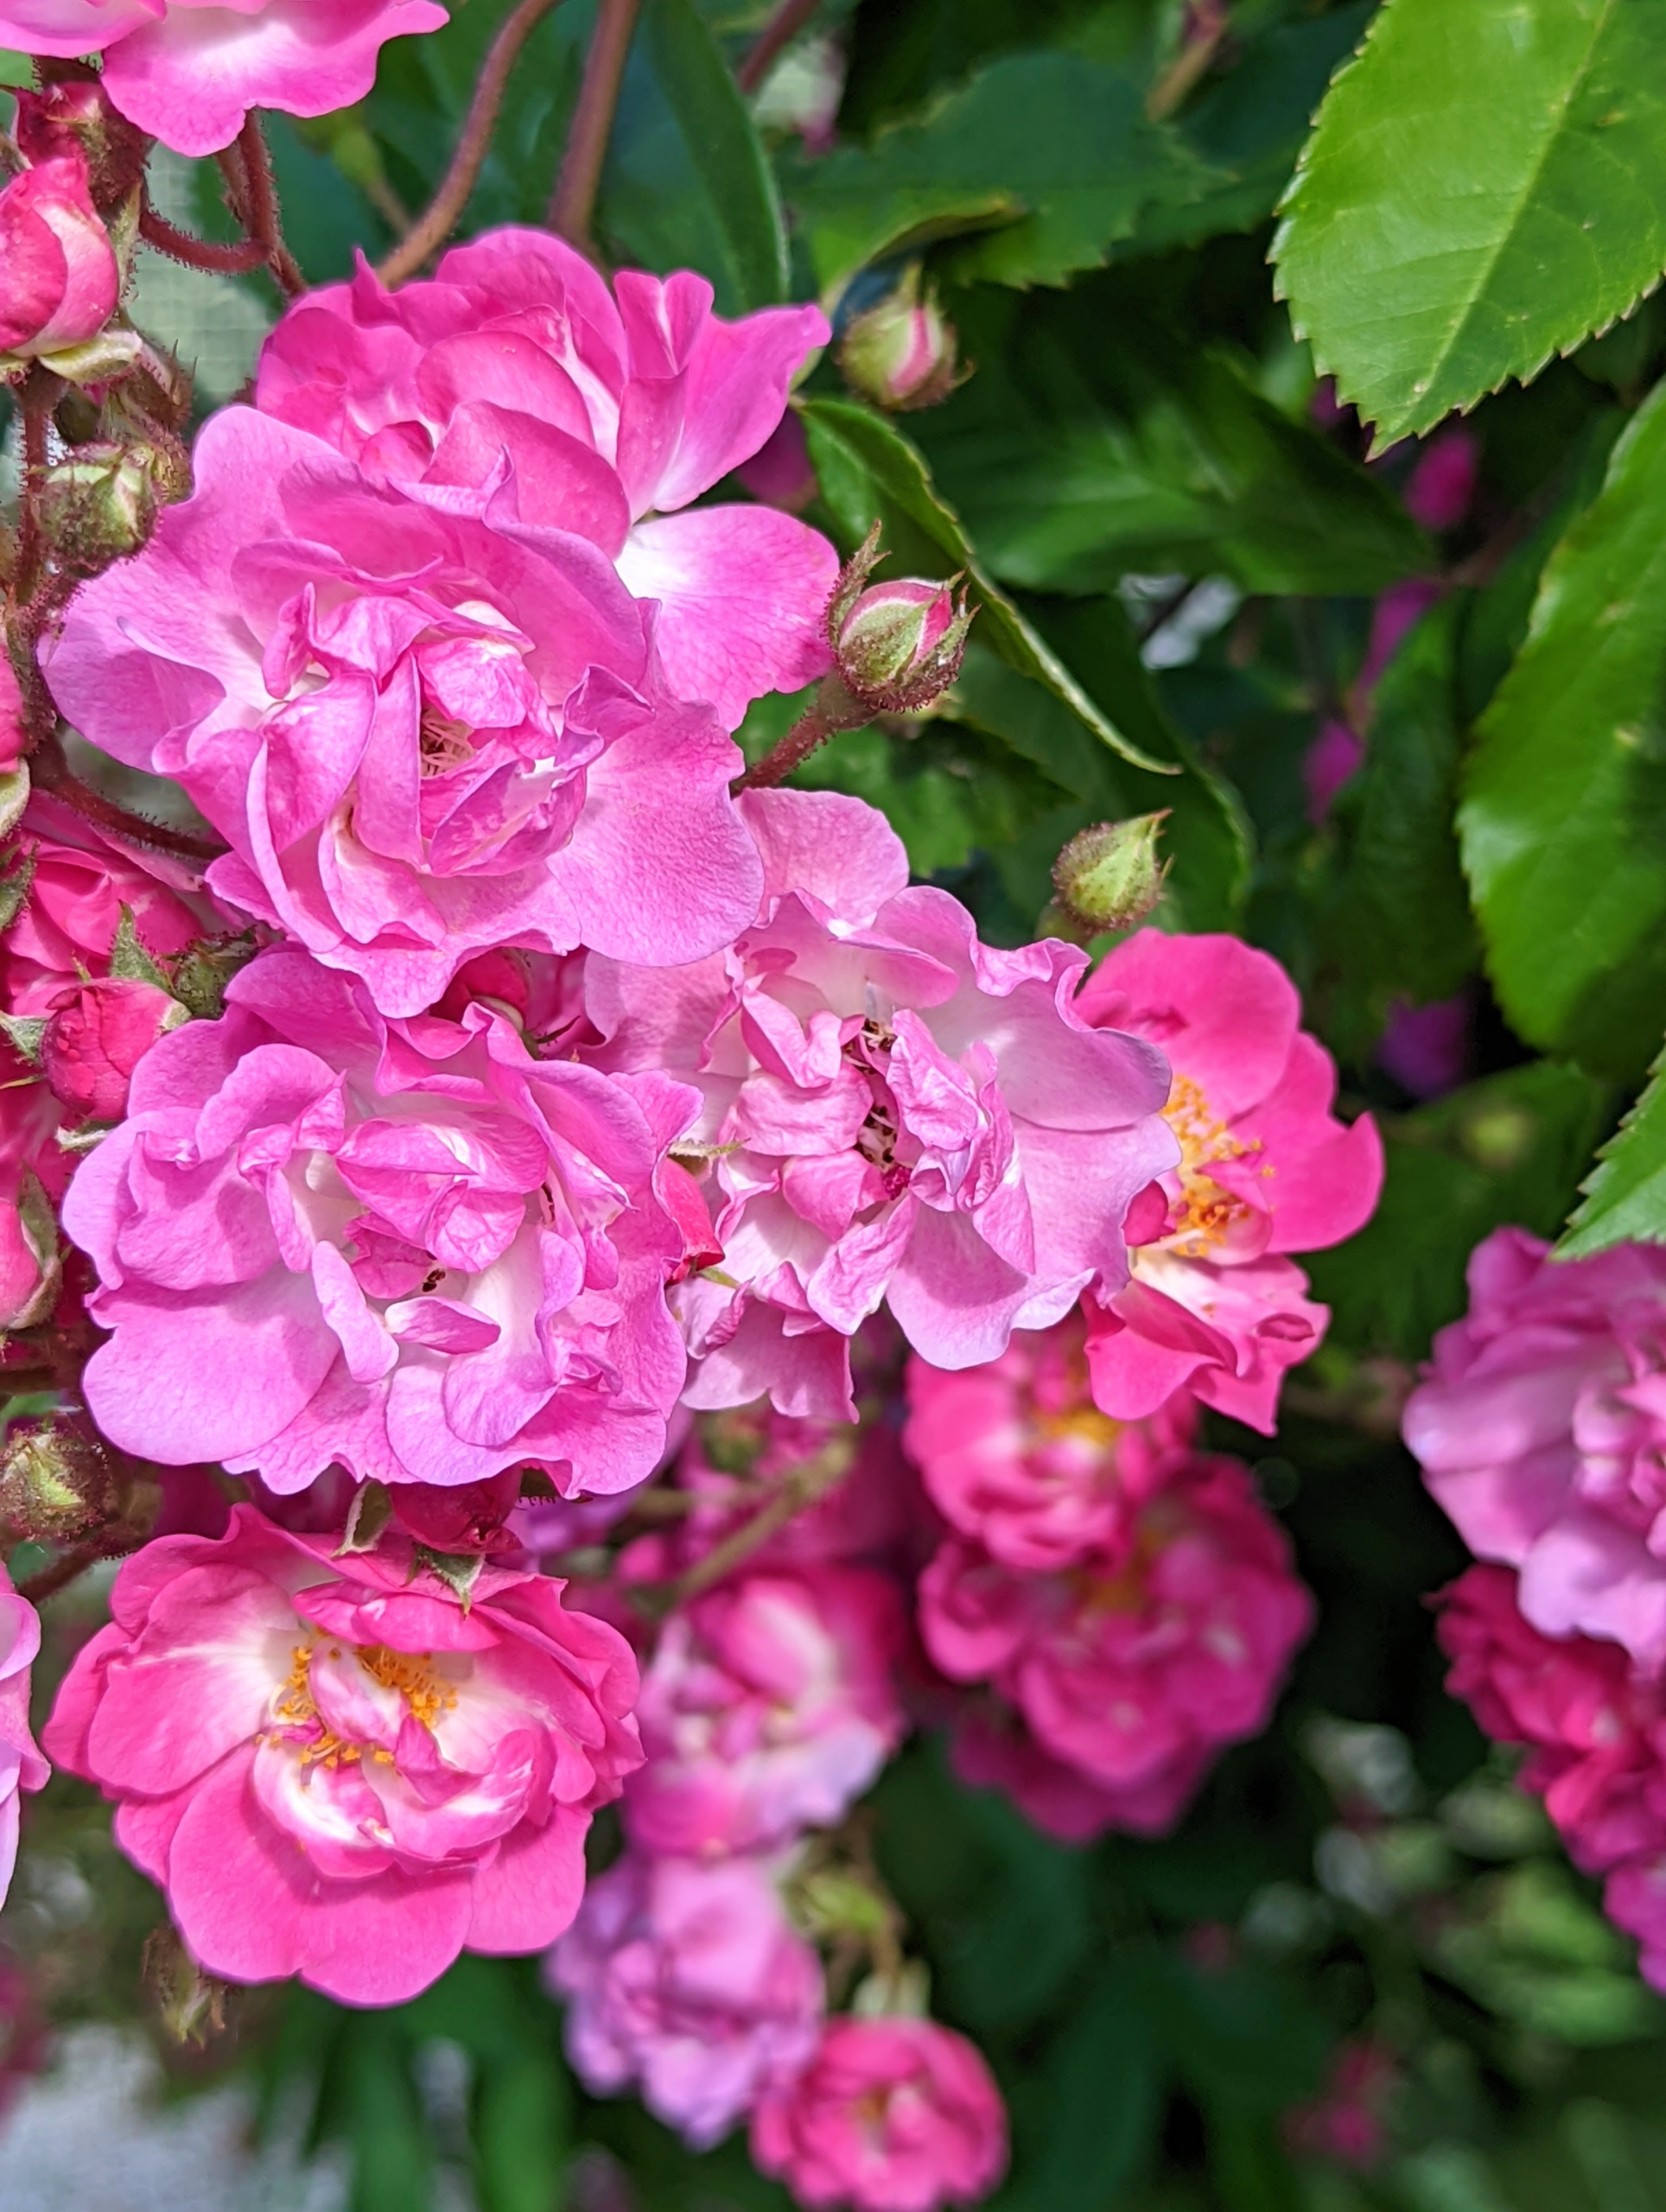 How to Prune Roses - Rose Notes